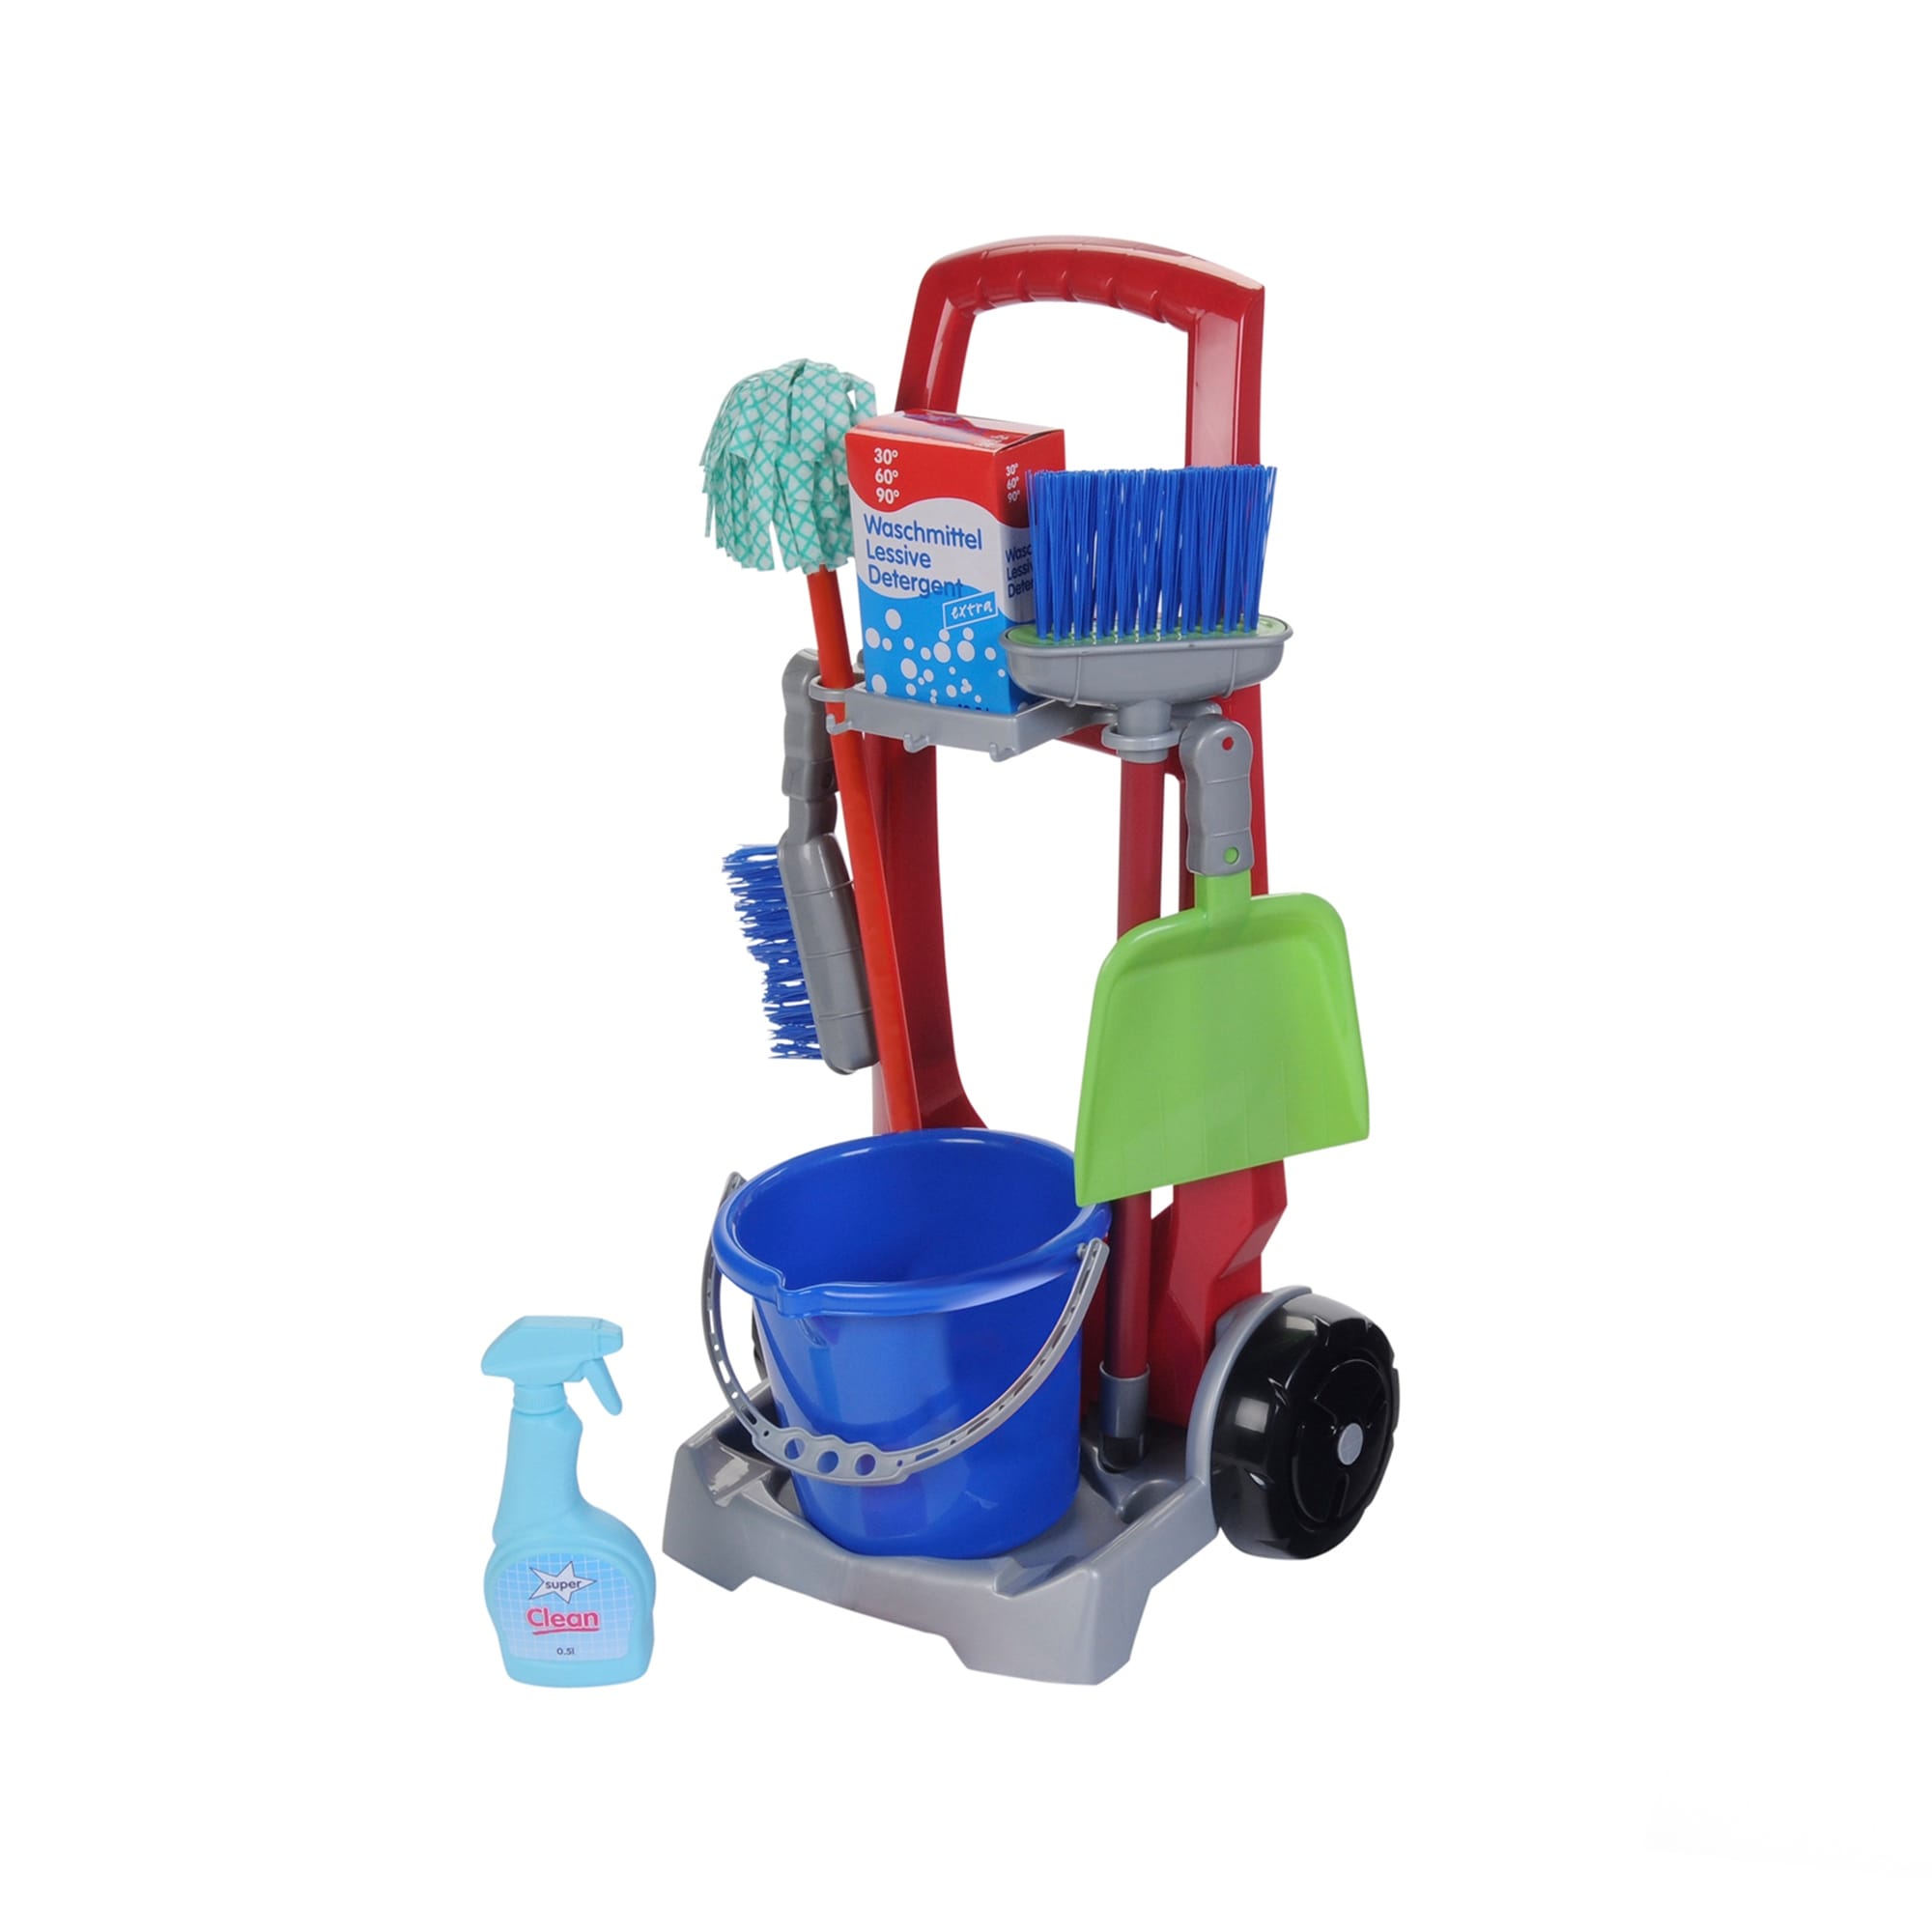 https://ak1.ostkcdn.com/images/products/is/images/direct/b1606fdcad156ed01d3829fed7b56f27cdf28efc/Theo-Klein-Kid%27s-Cleaning-Trolley-with-Miele-Vacuum-Toy-Set-for-Ages-3-%26-Up%2C-Red.jpg